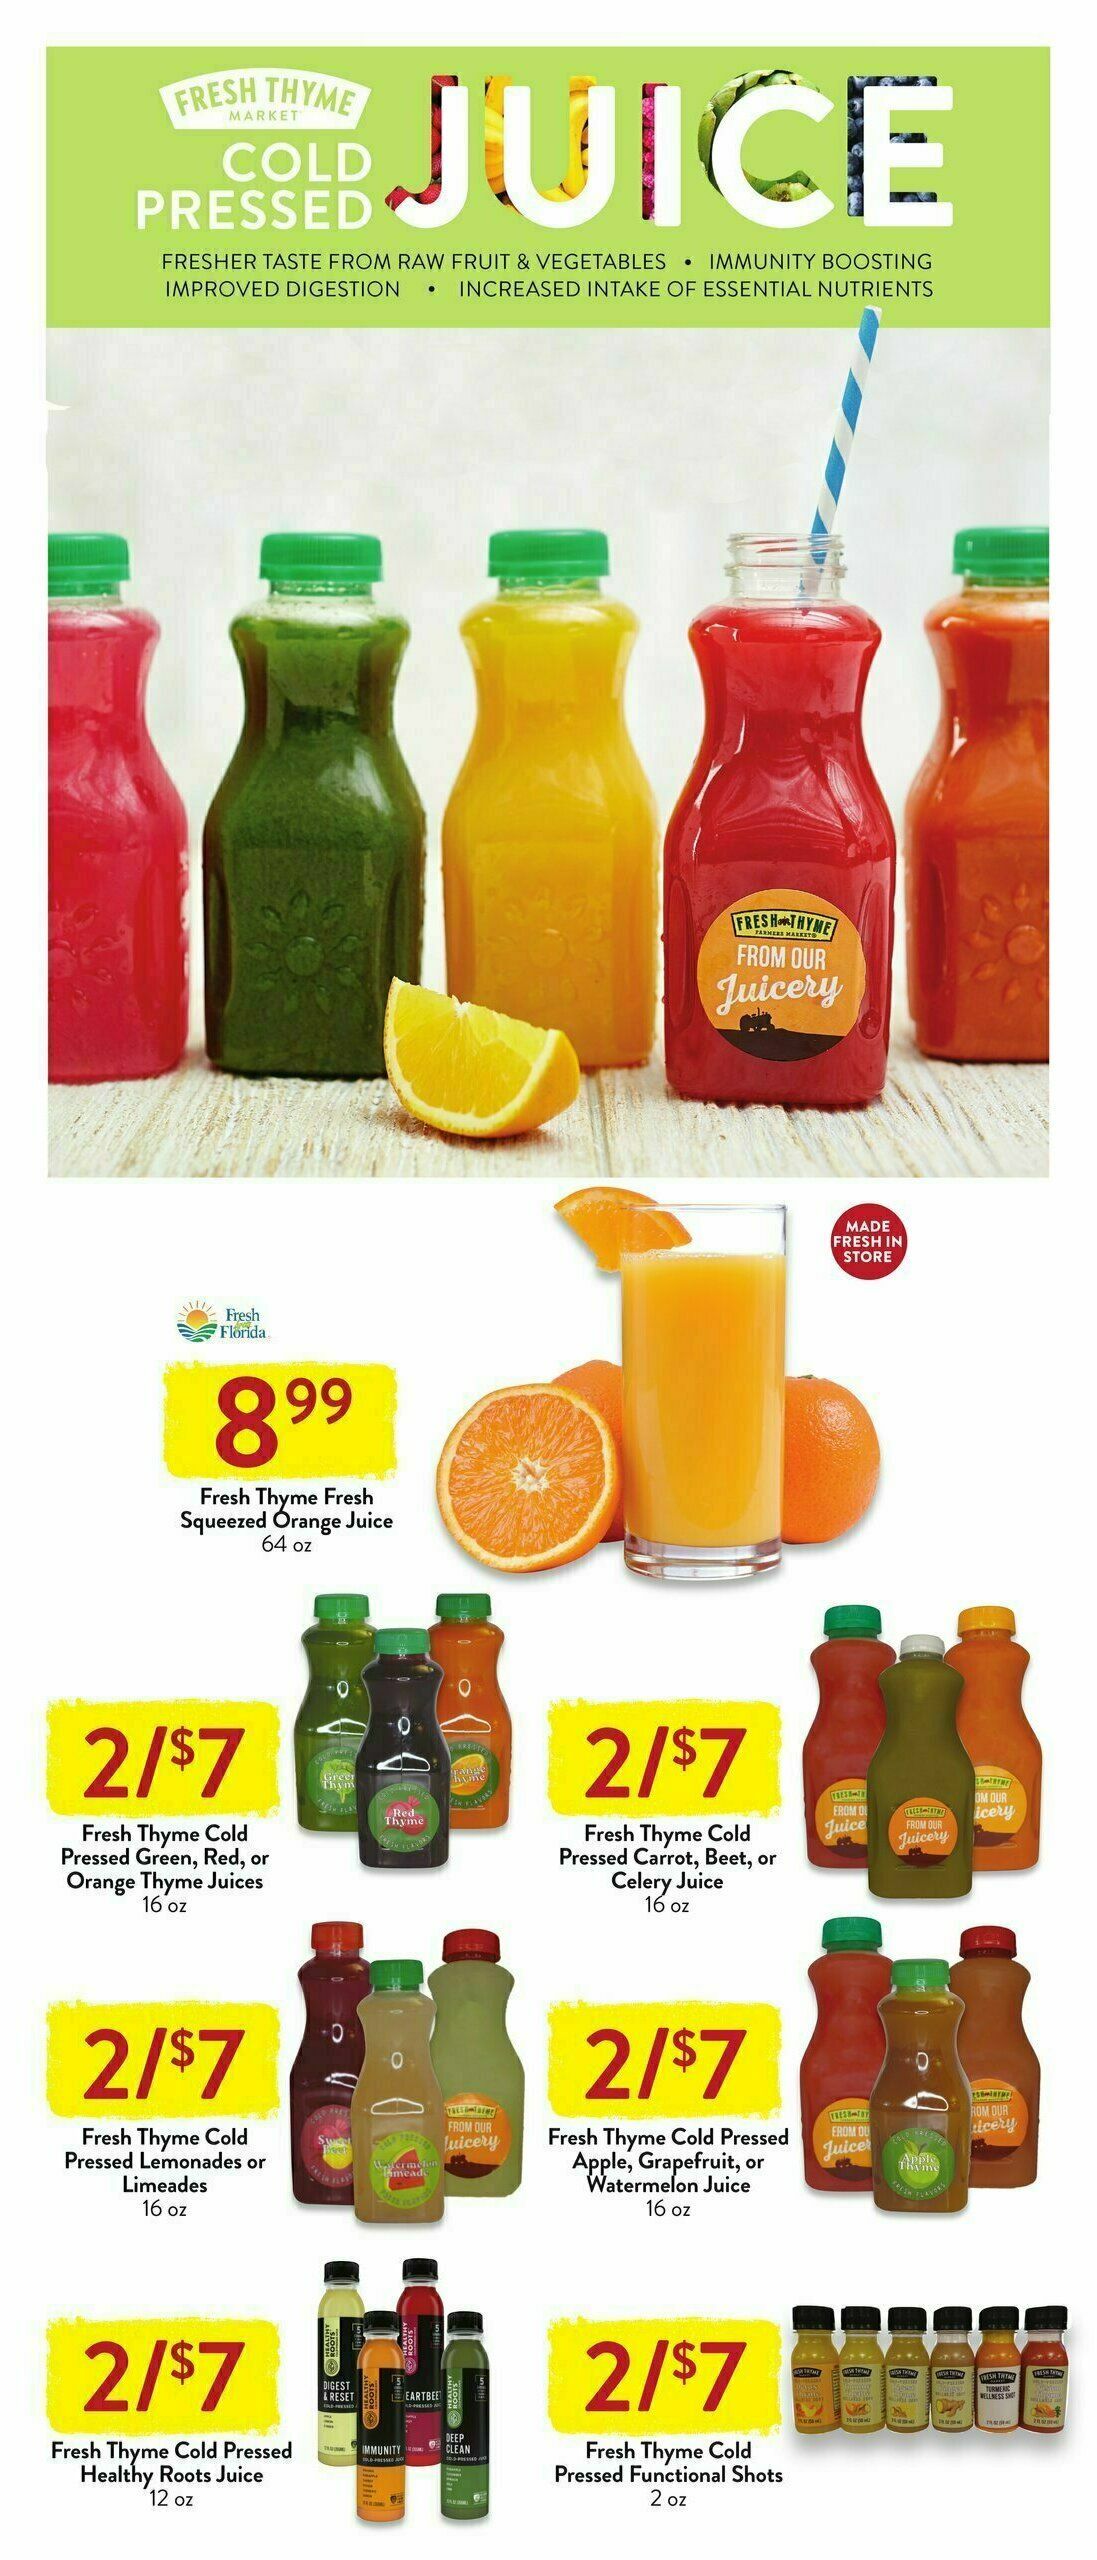 Fresh Thyme Farmers Market Weekly Ad from July 12